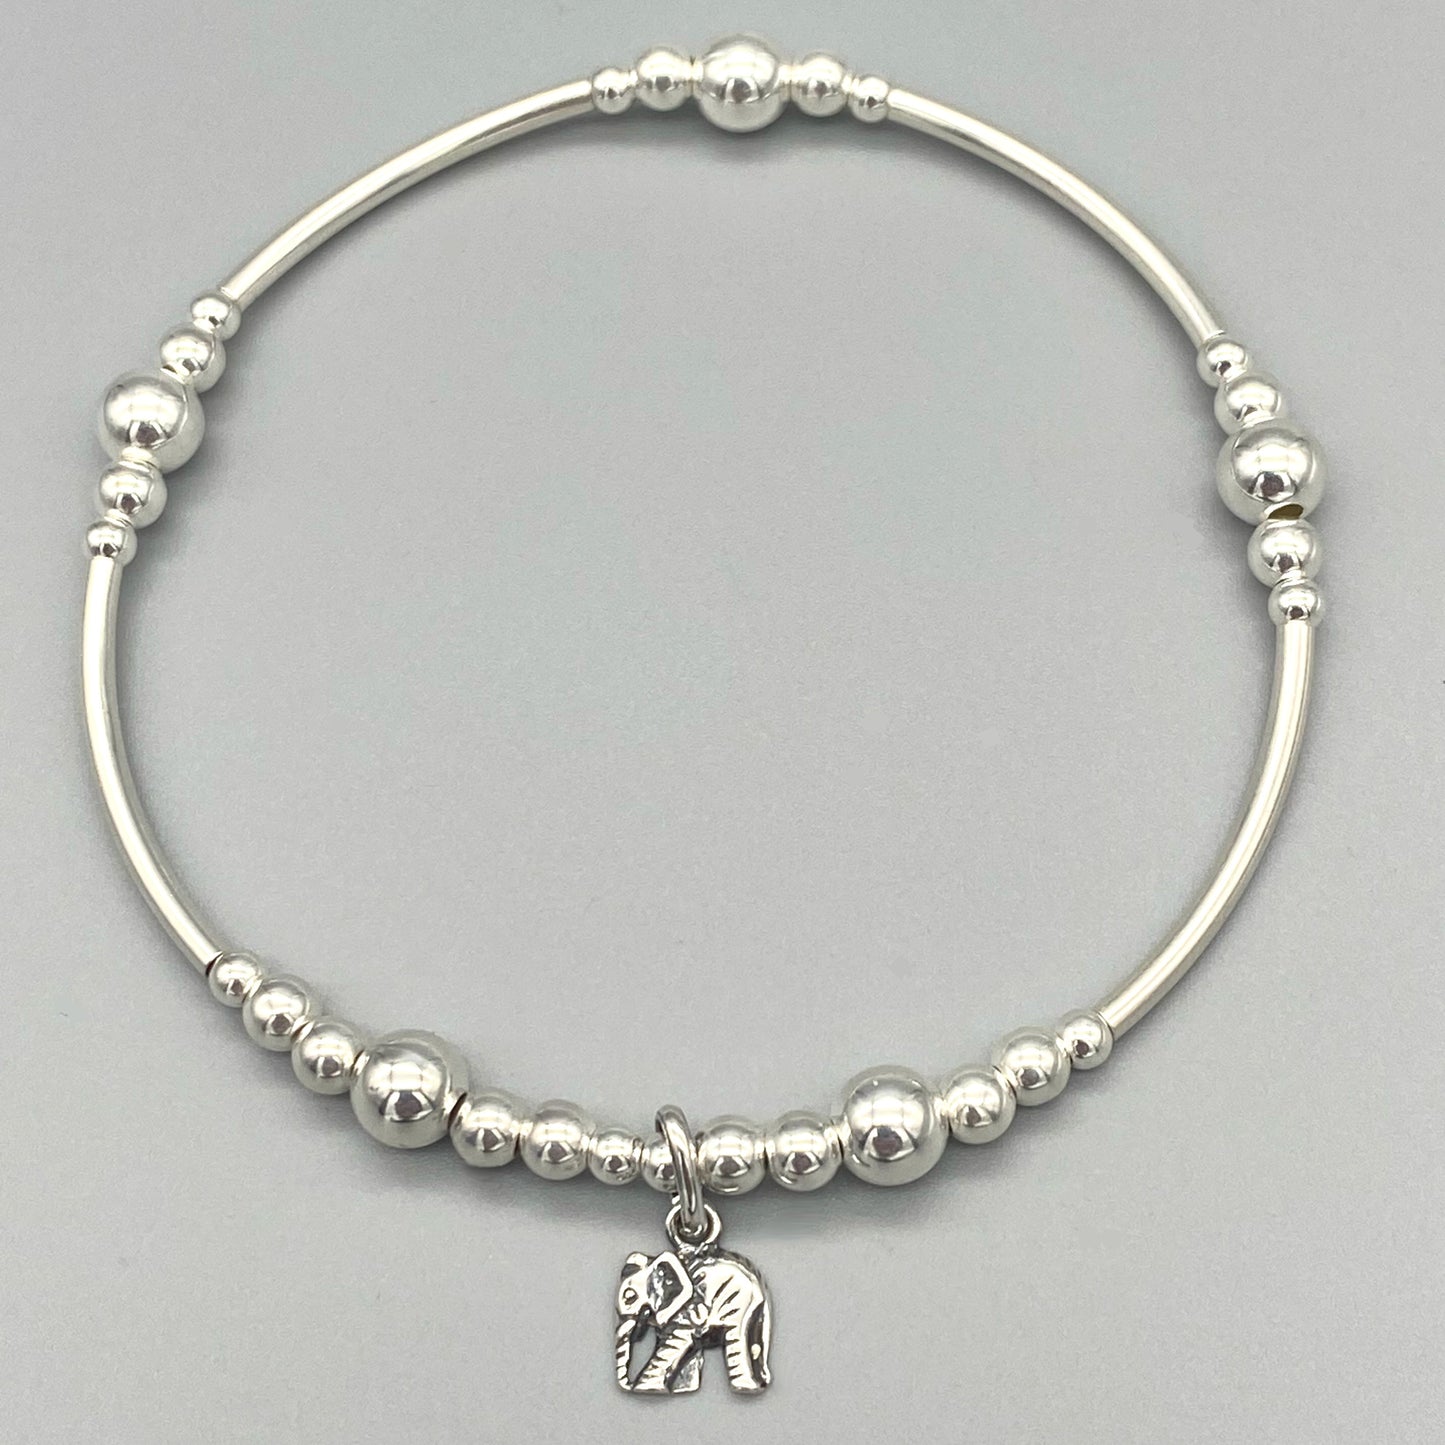 Elephant charm sterling silver women's stacking bracelet by My Silver Wish